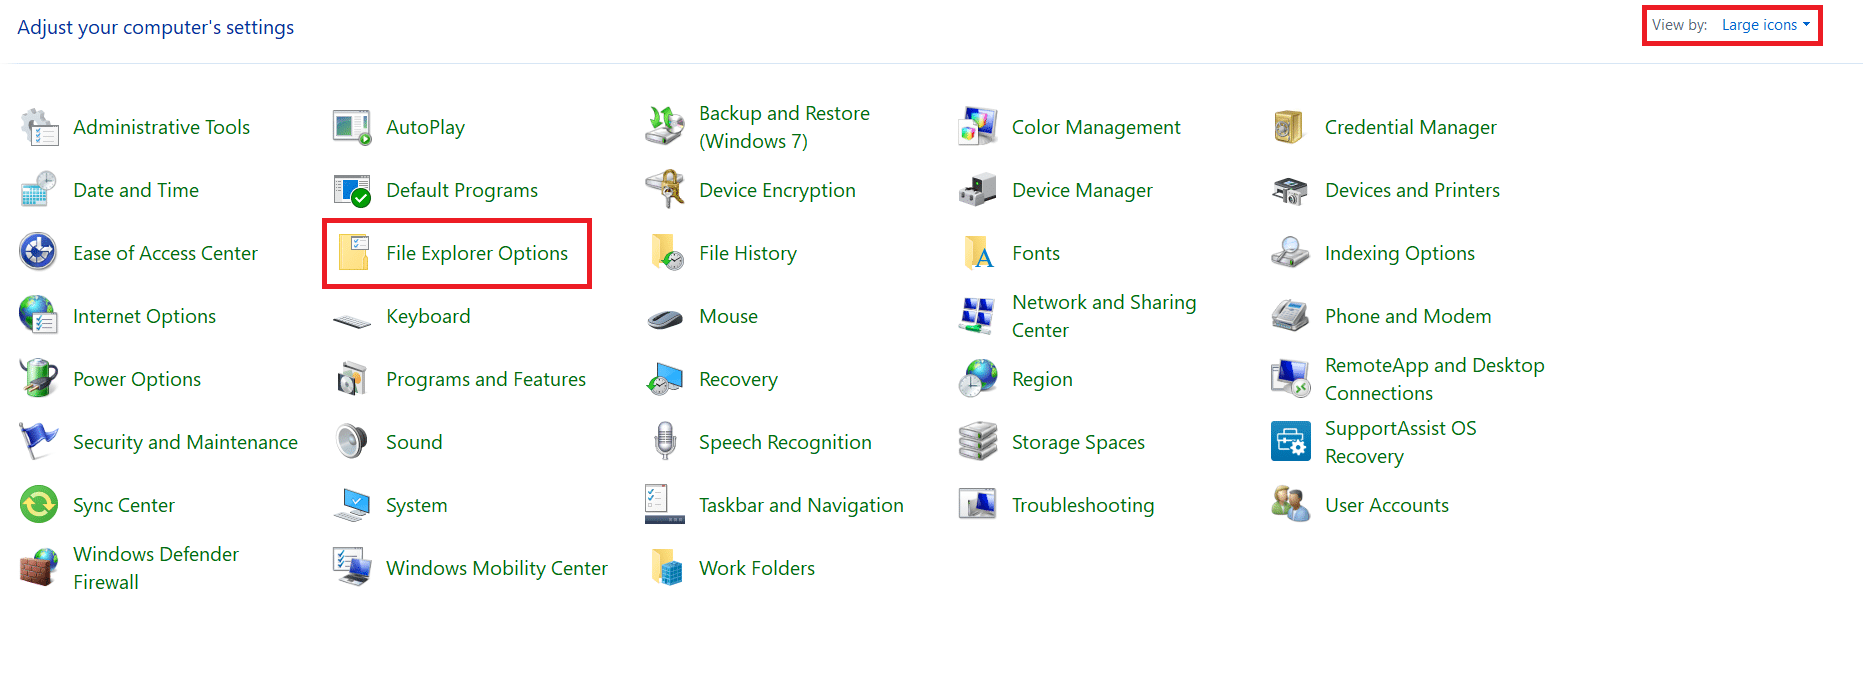 Ensure that the View by option is set as Large icons. Select File Explorer Options. 